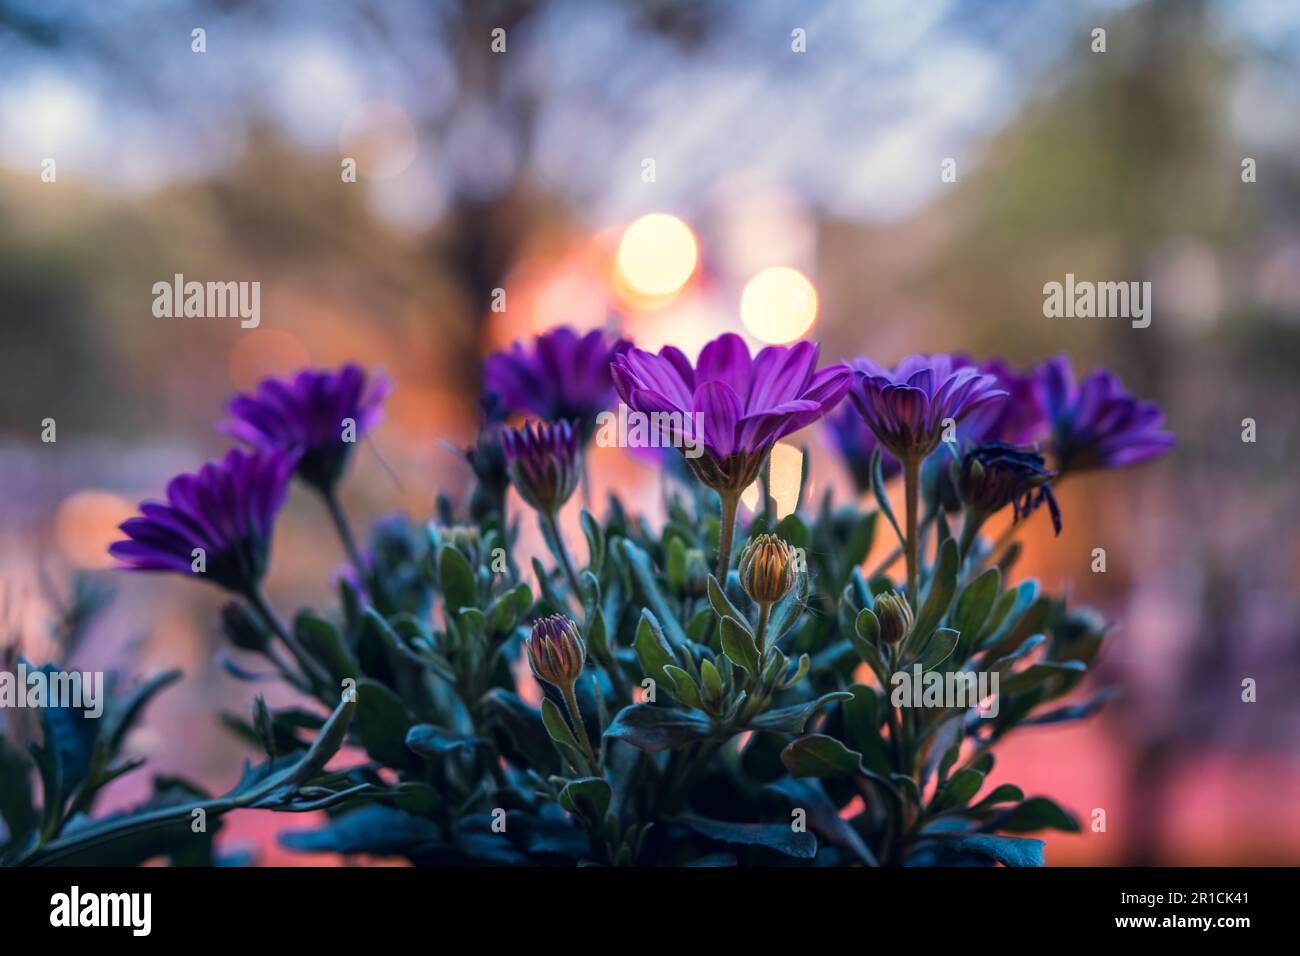 African daisy (Osteospermum ecklonis) in a pot on a balcony with a lit background in the evening. Stock Photo